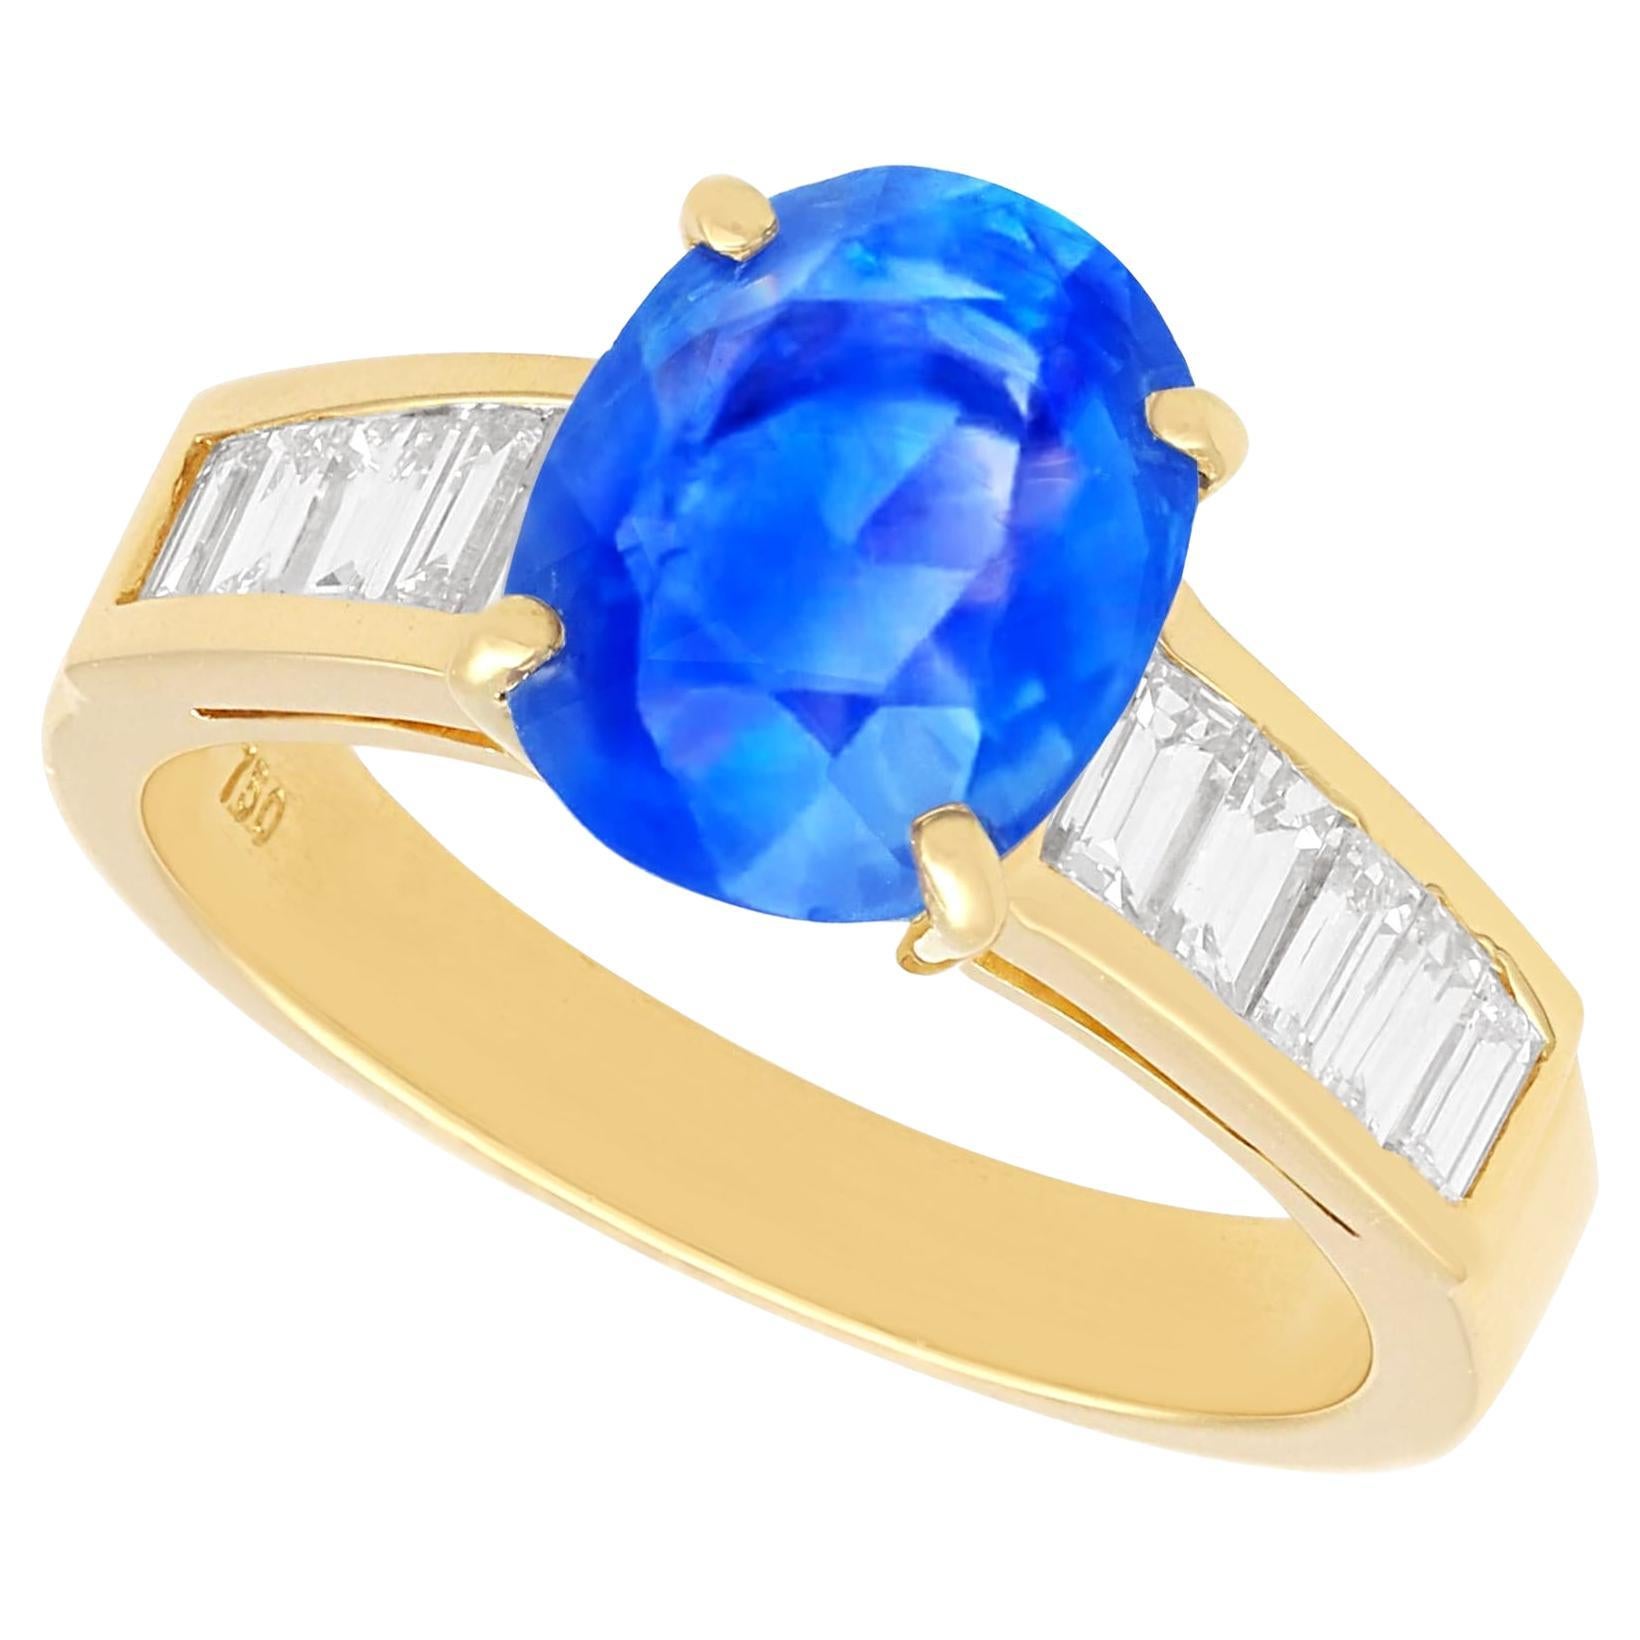 Vintage 3.52ct Ceylon Sapphire and 0.60ct Diamond, 18ct Yellow Gold Dress Ring For Sale